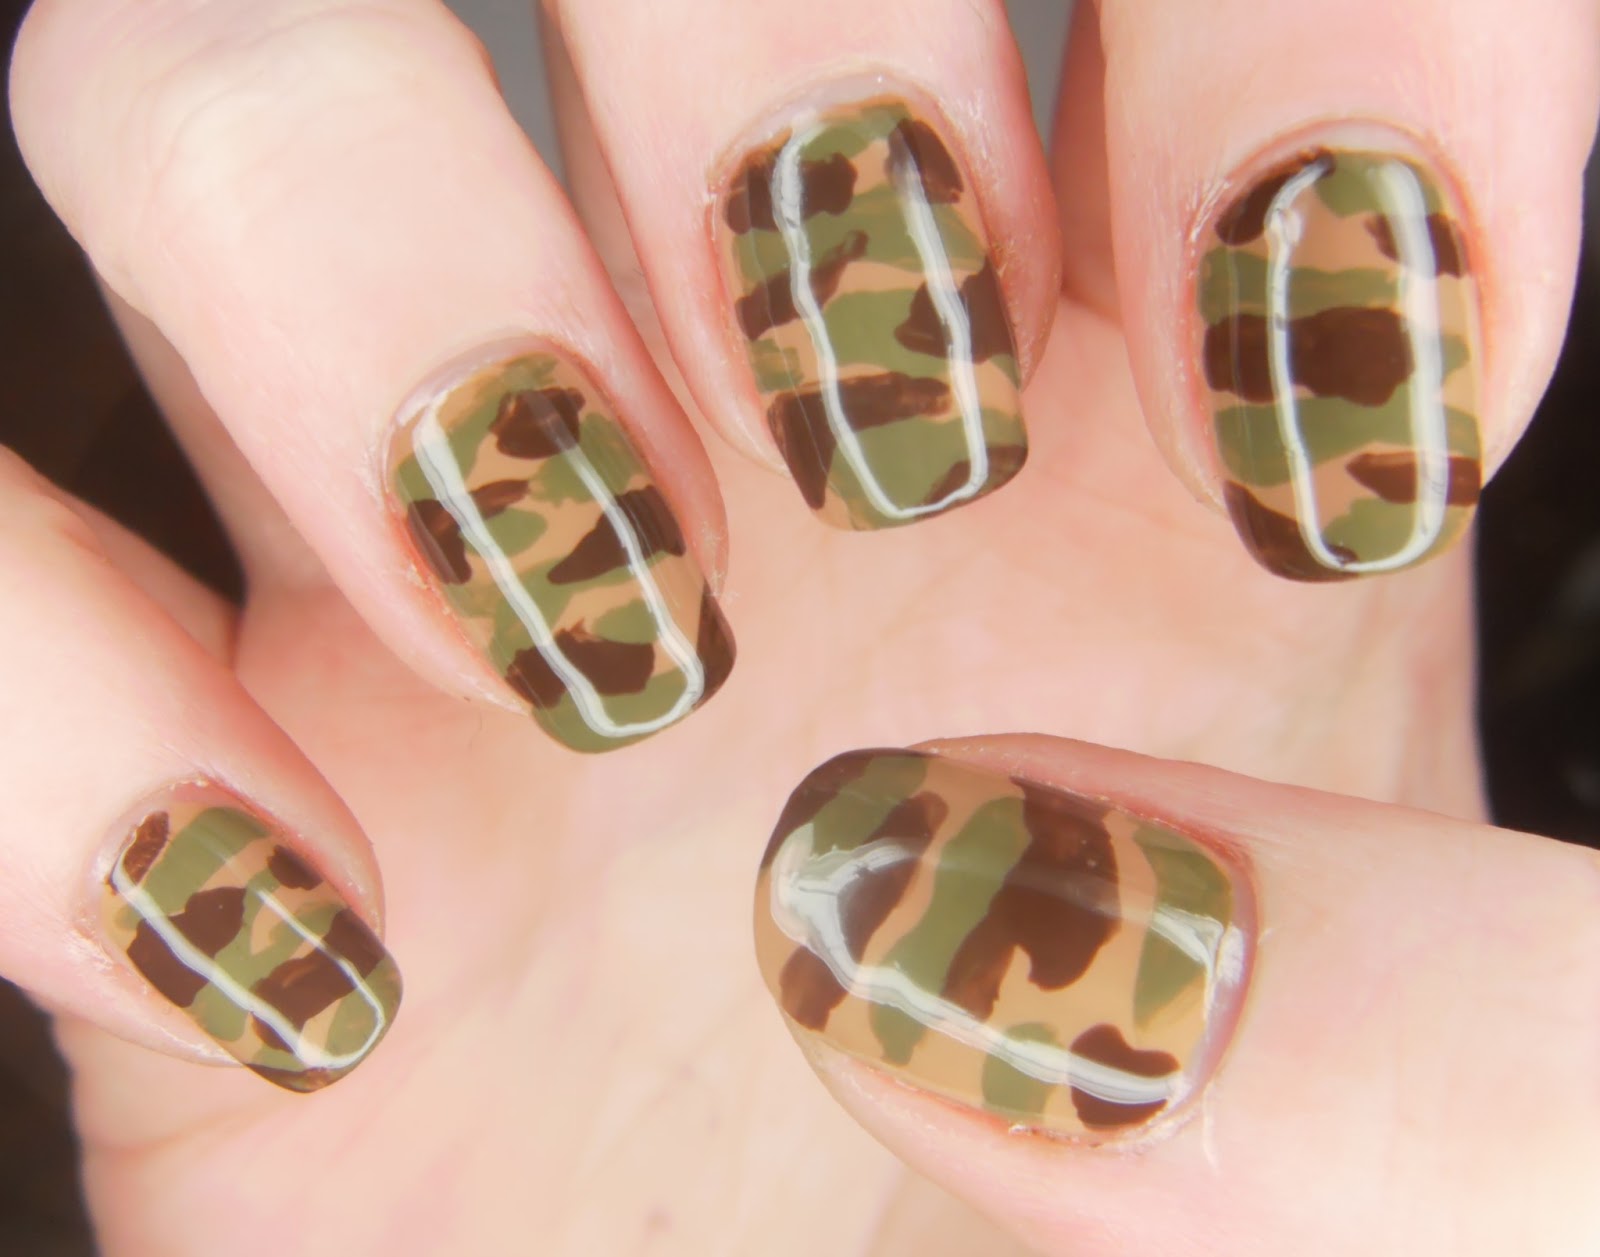 6. Camo Nail Art Ideas for Every Skill Level - wide 6